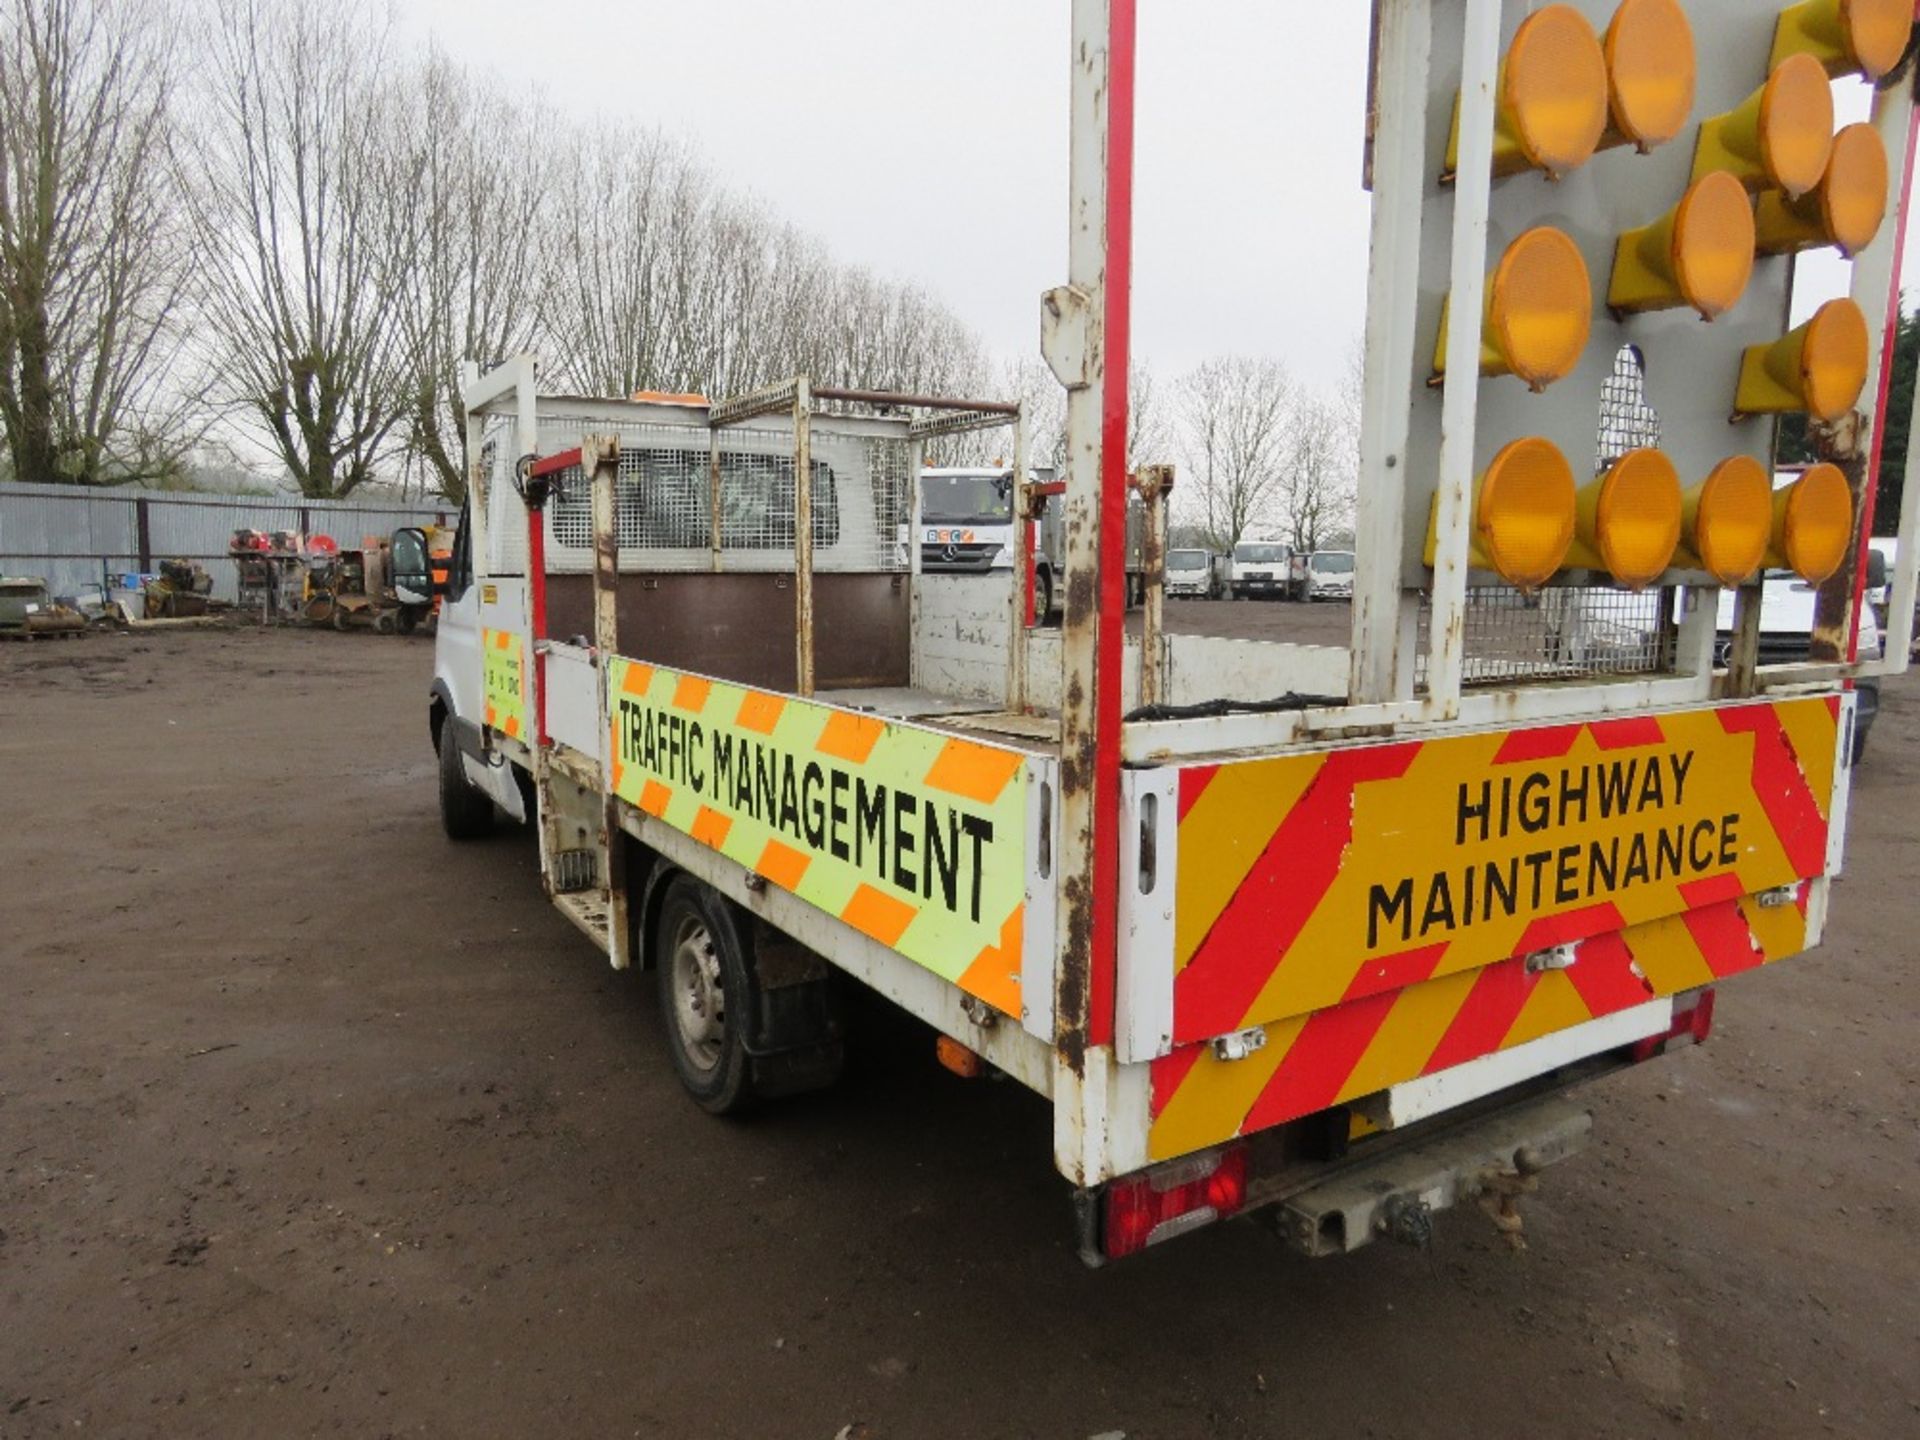 IVECO 35S13 TRAFFIC MANAGEMENT 3.5 TONNE DROP SIDE TRUCK REG: PO12 BBE. WITH V5 AND MOT UNTIL 26/04/ - Image 4 of 12